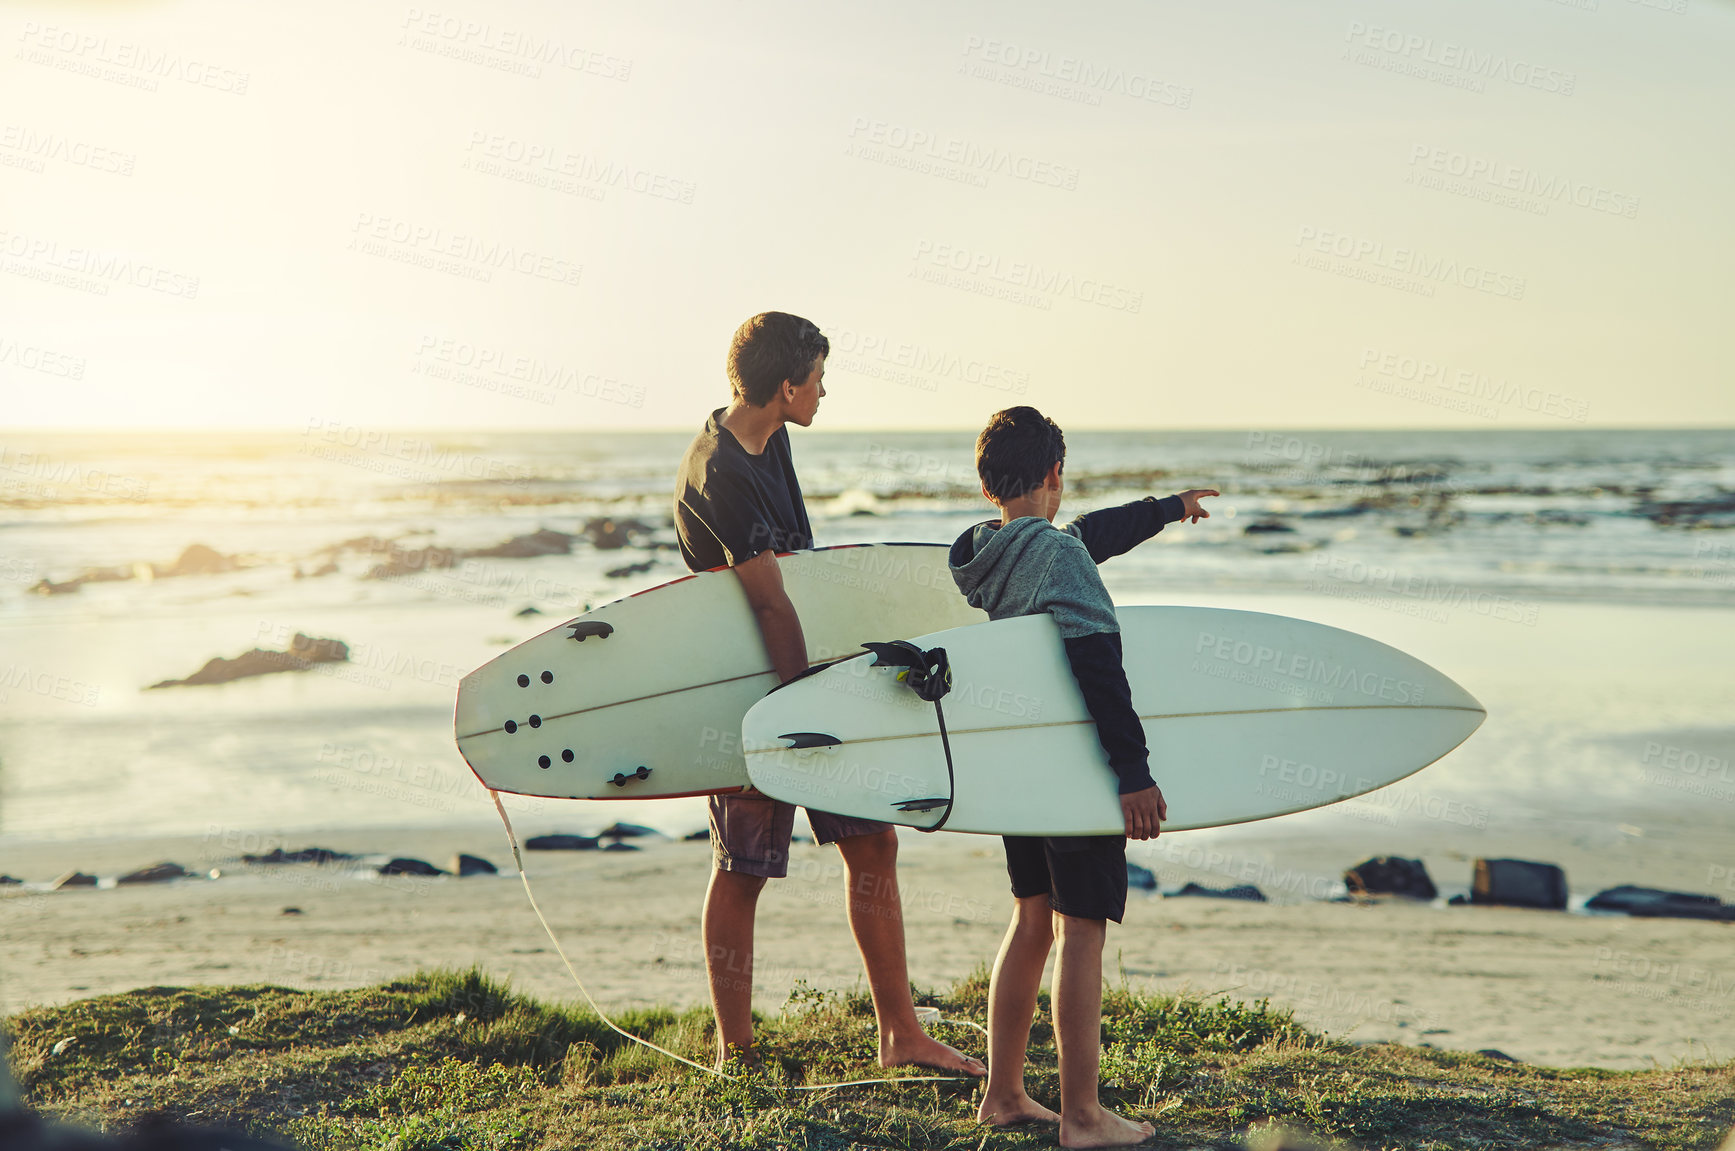 Buy stock photo Shot of two young brothers holding their surfboards while looking towards the ocean